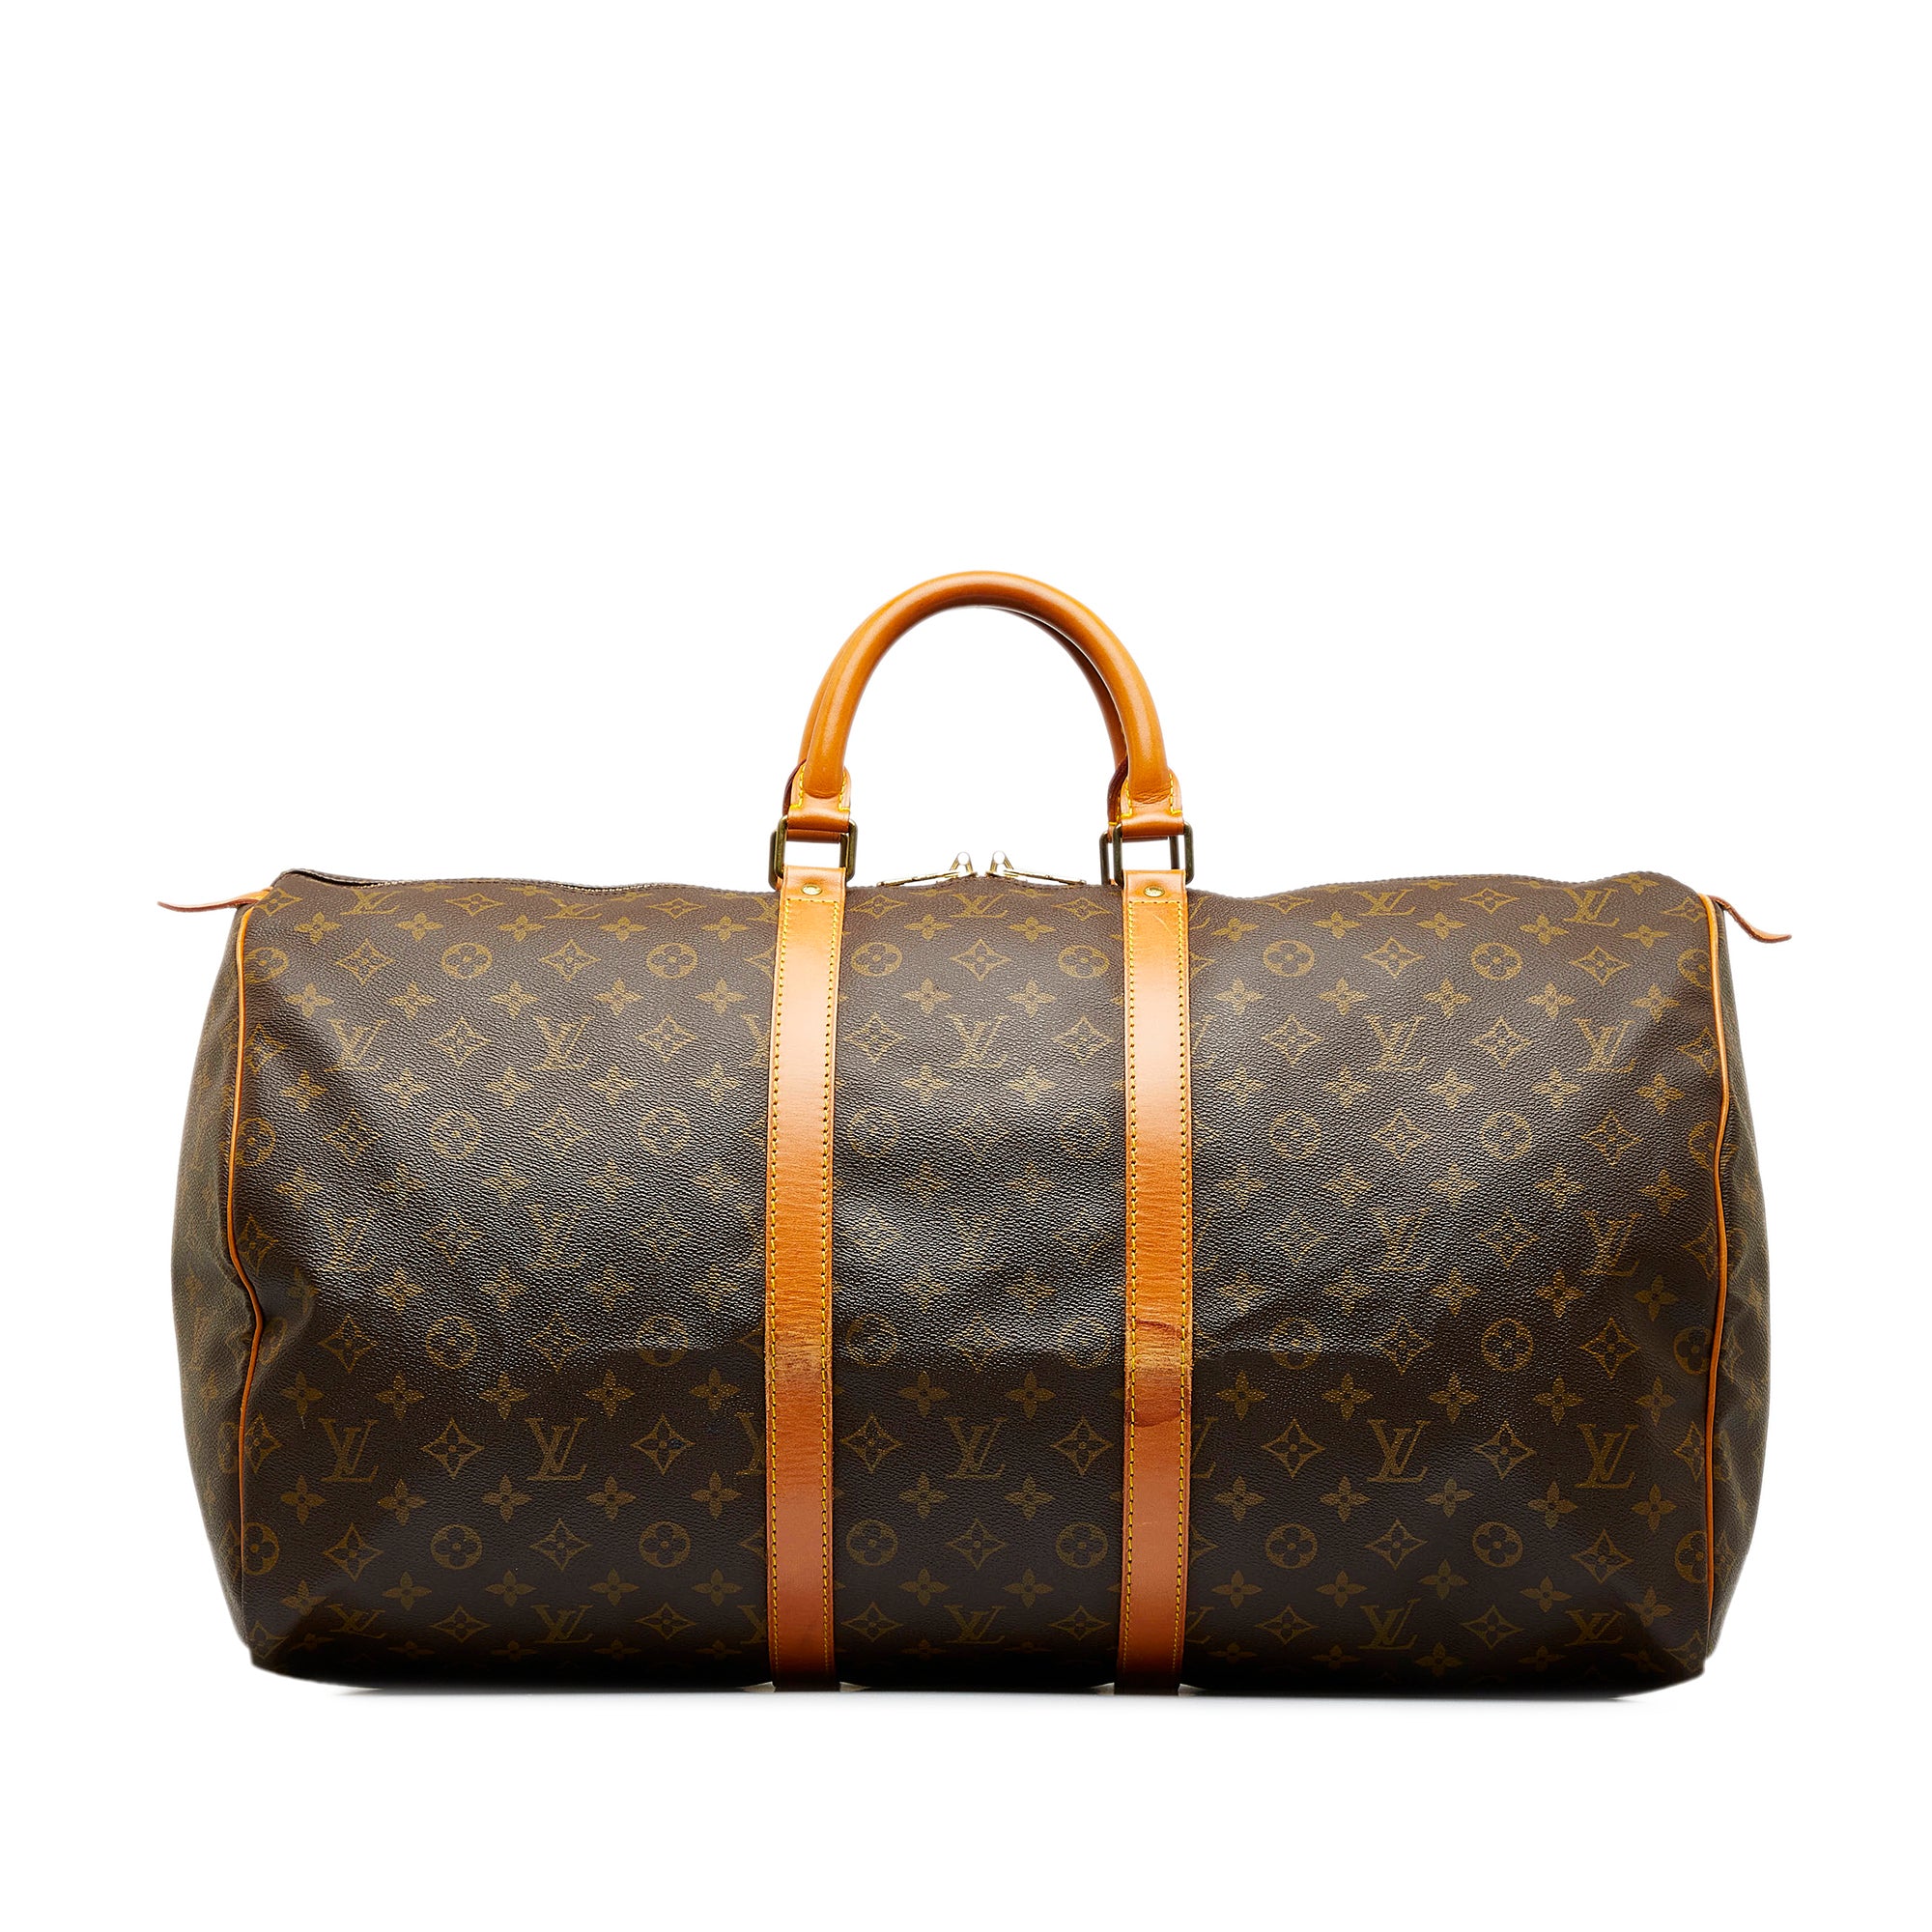 red leather louis vuitton travel bag